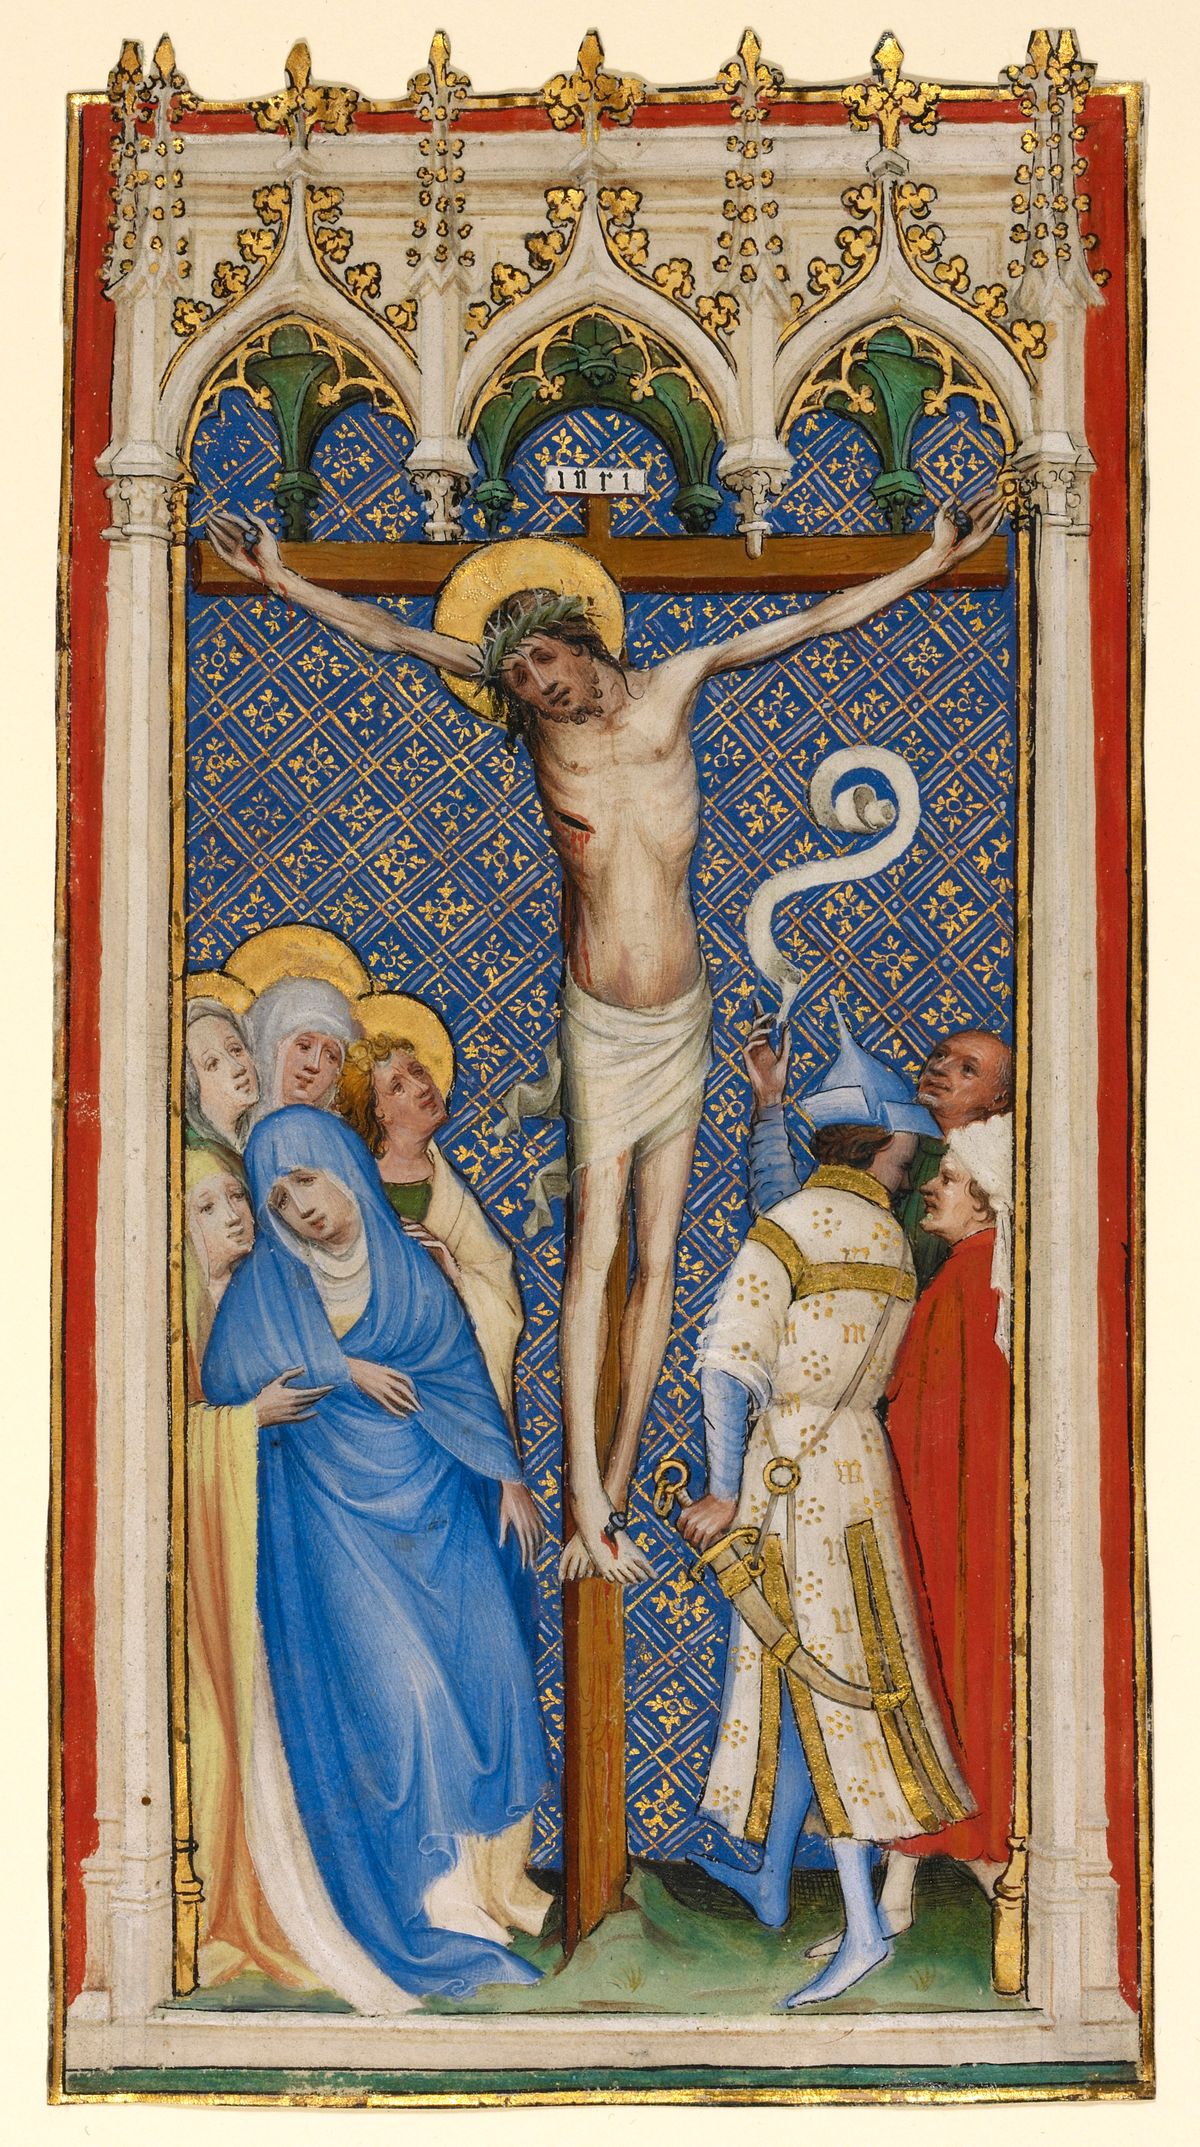 The Crucifixion by Master of St. Veronica (1400-1410) - Public Domain Bible Painting